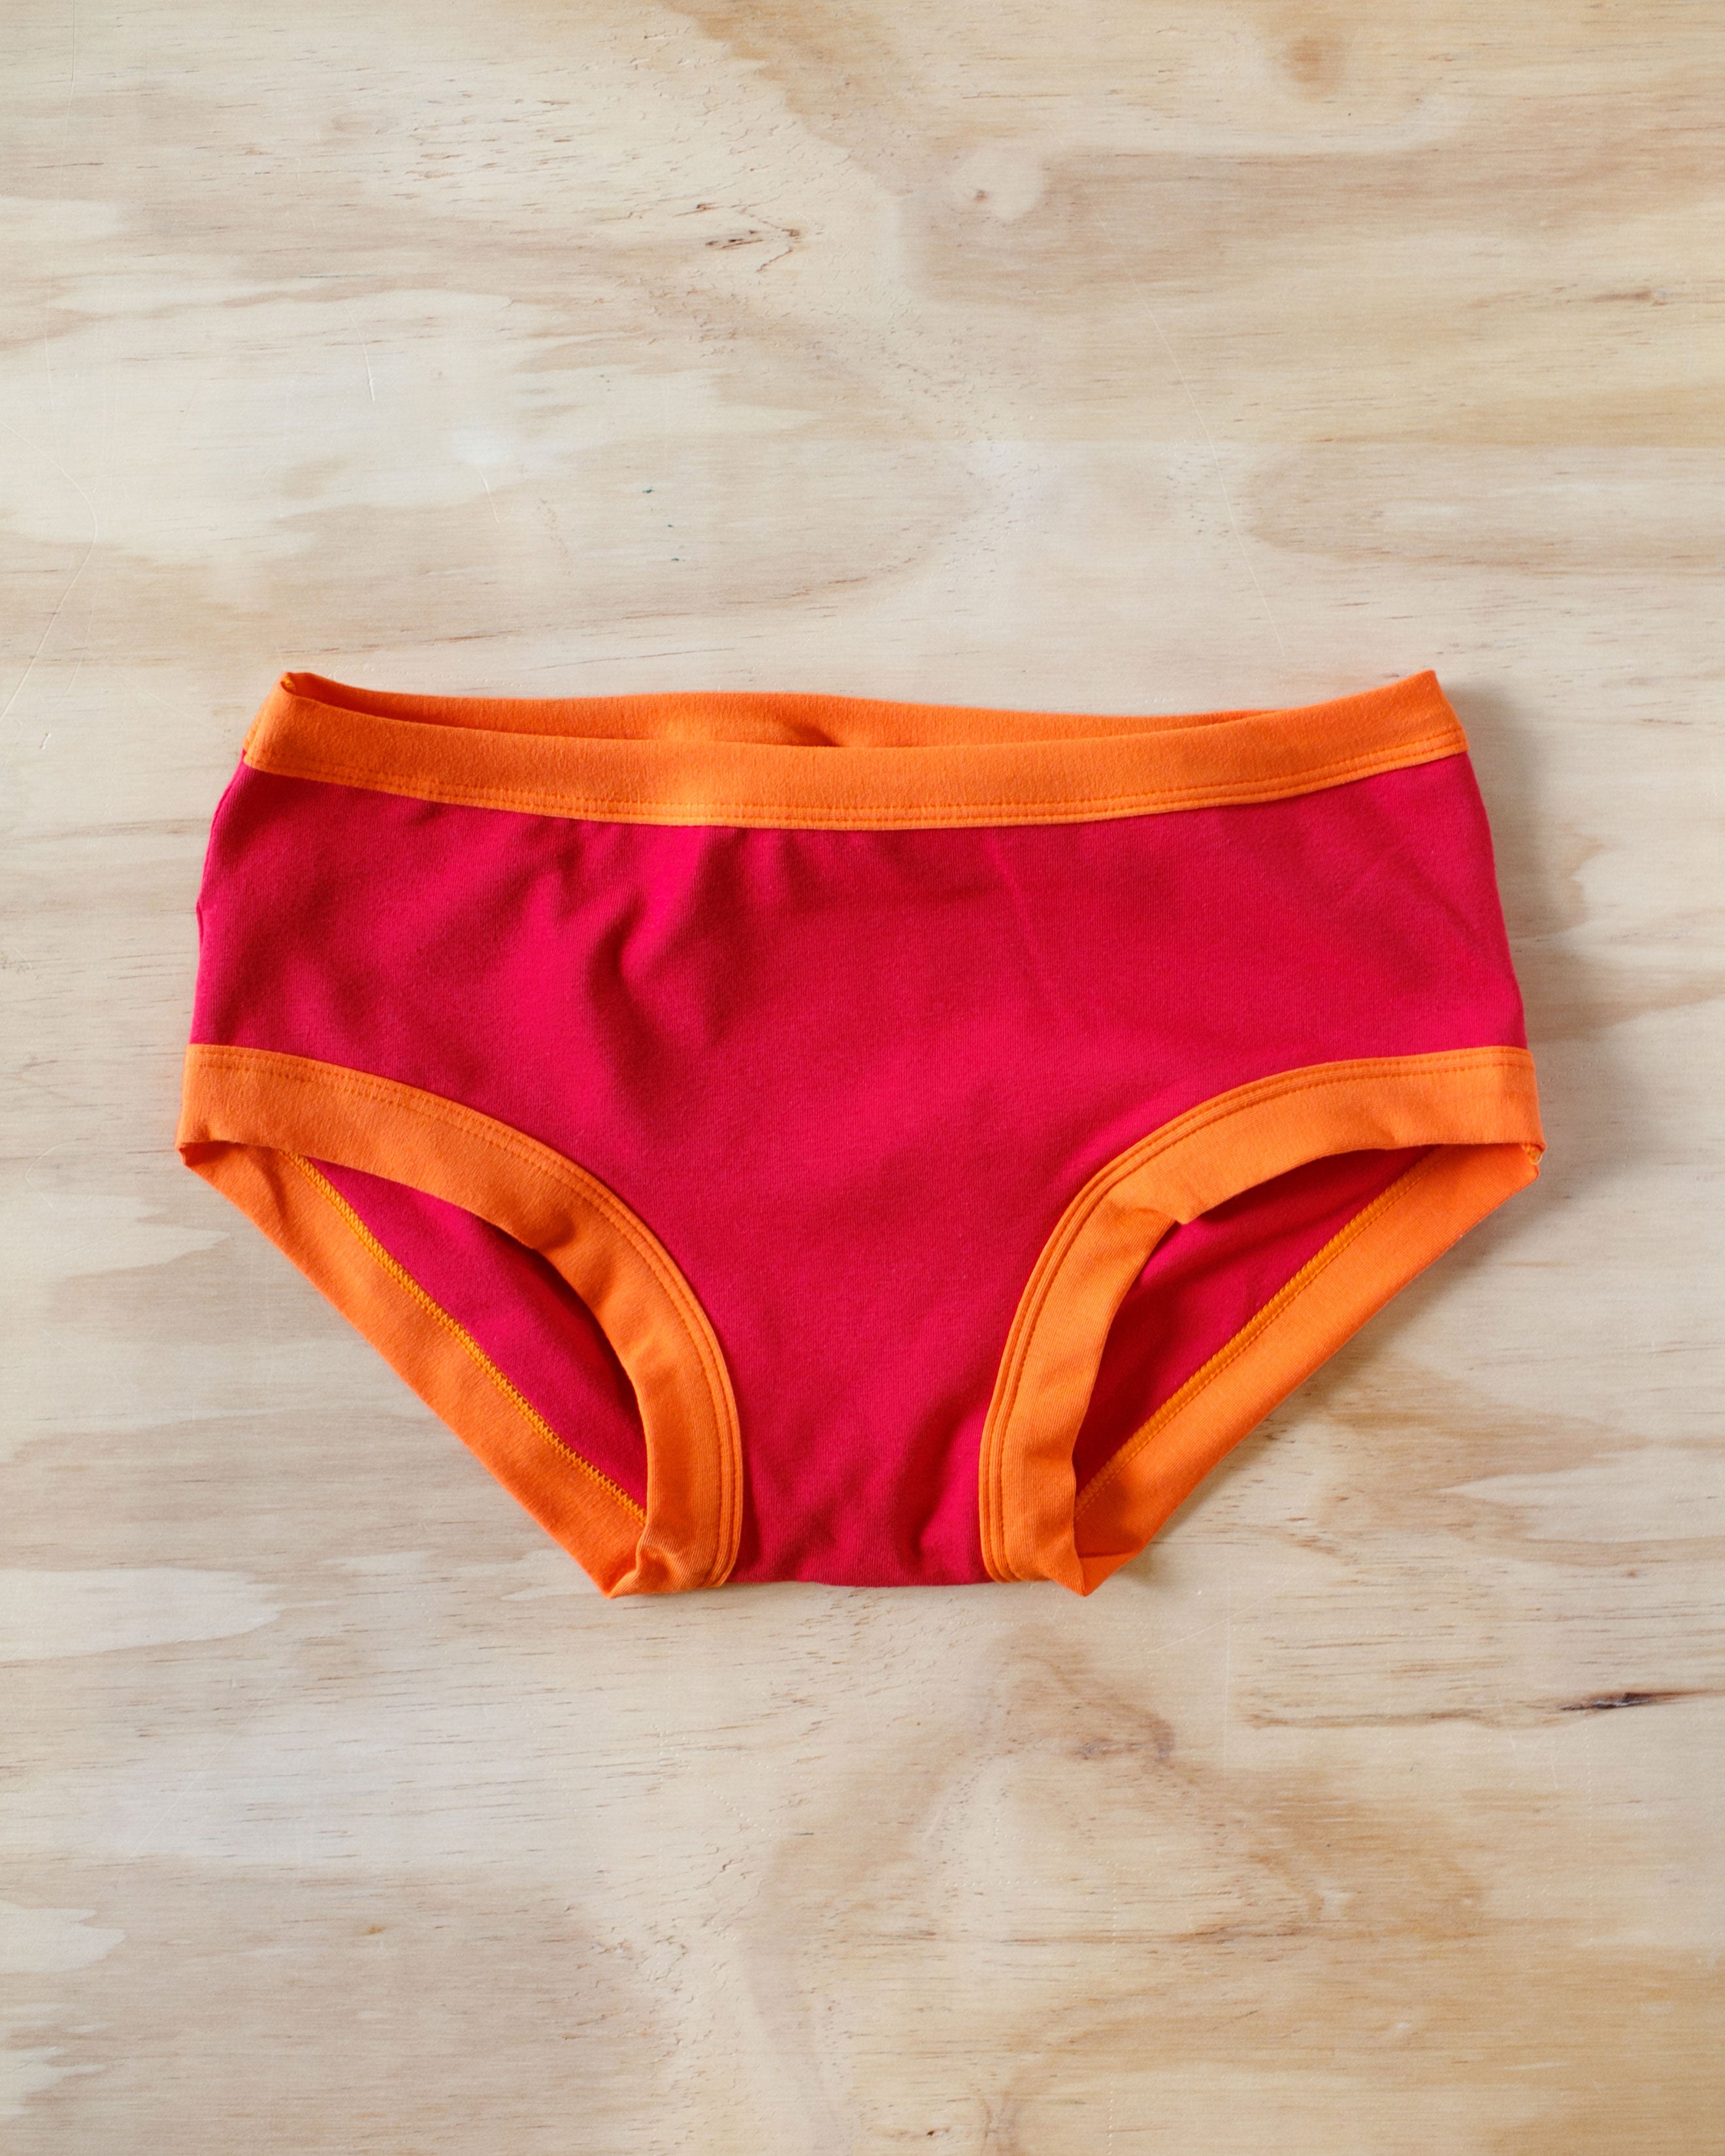 Flat lay on wood surface of Hipster Pants on Fire: red with orange binding.